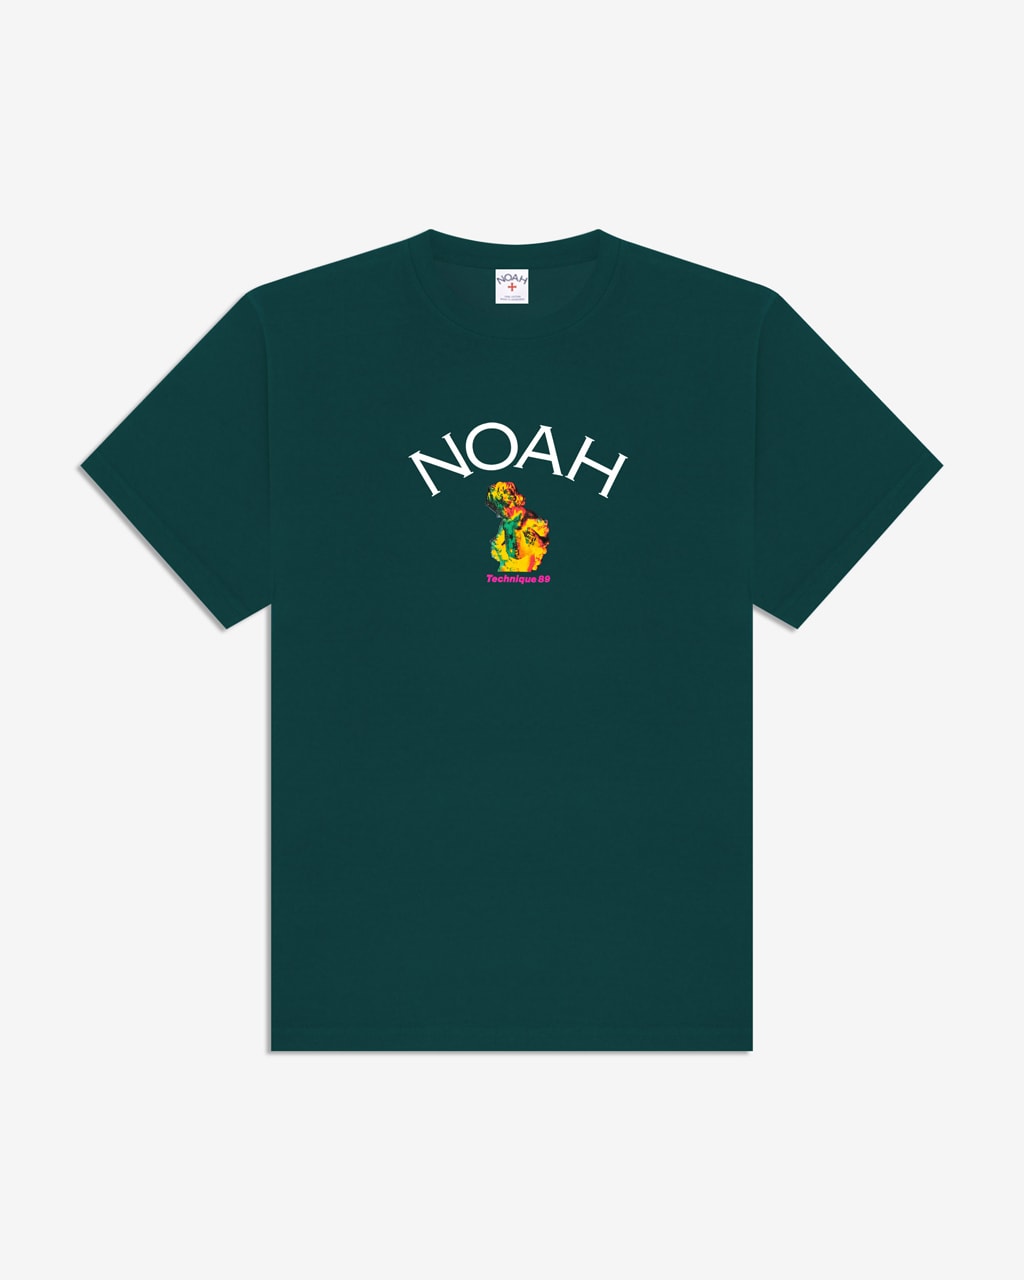 NOAH x New Order Collaboration Collection Release Date true faith thieves like us perfect kiss truth denial technique bizarre love triangle movement power corruption lies low life